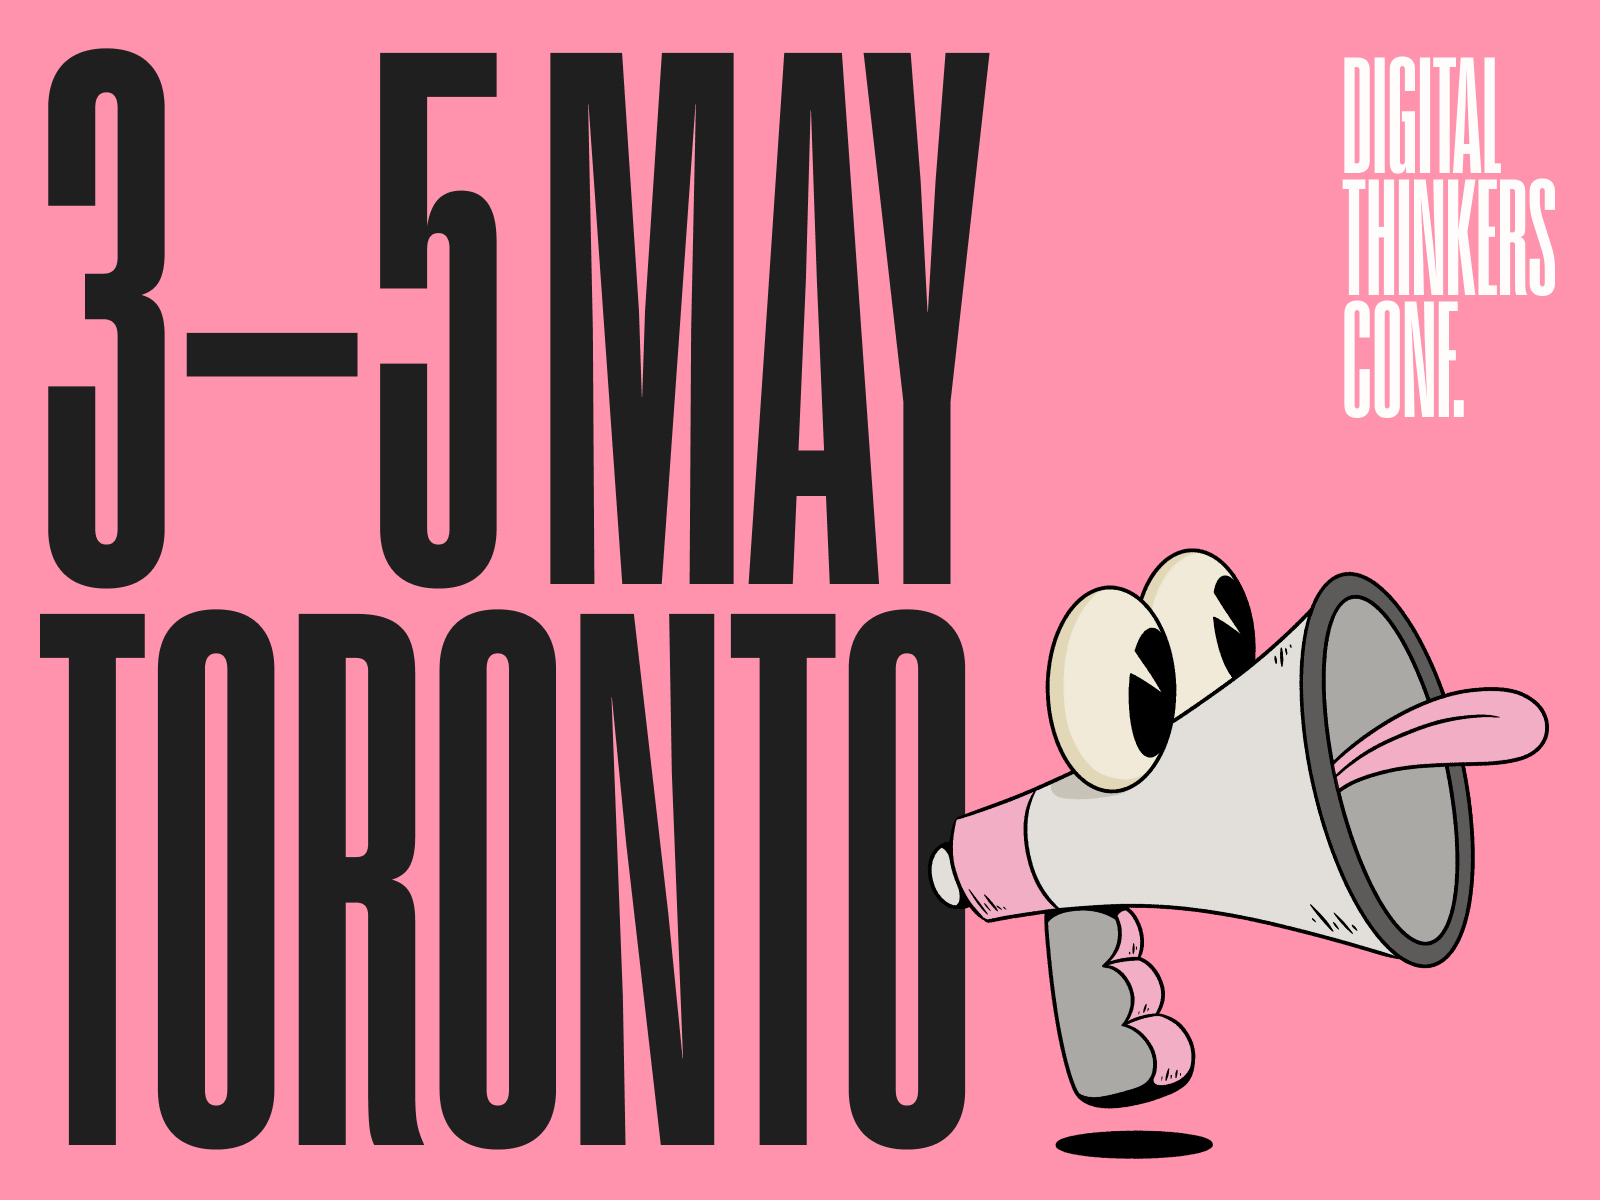 Digital Thinkers Conference Toronto, May 3-5, Get your Early Bird Ticket Now!